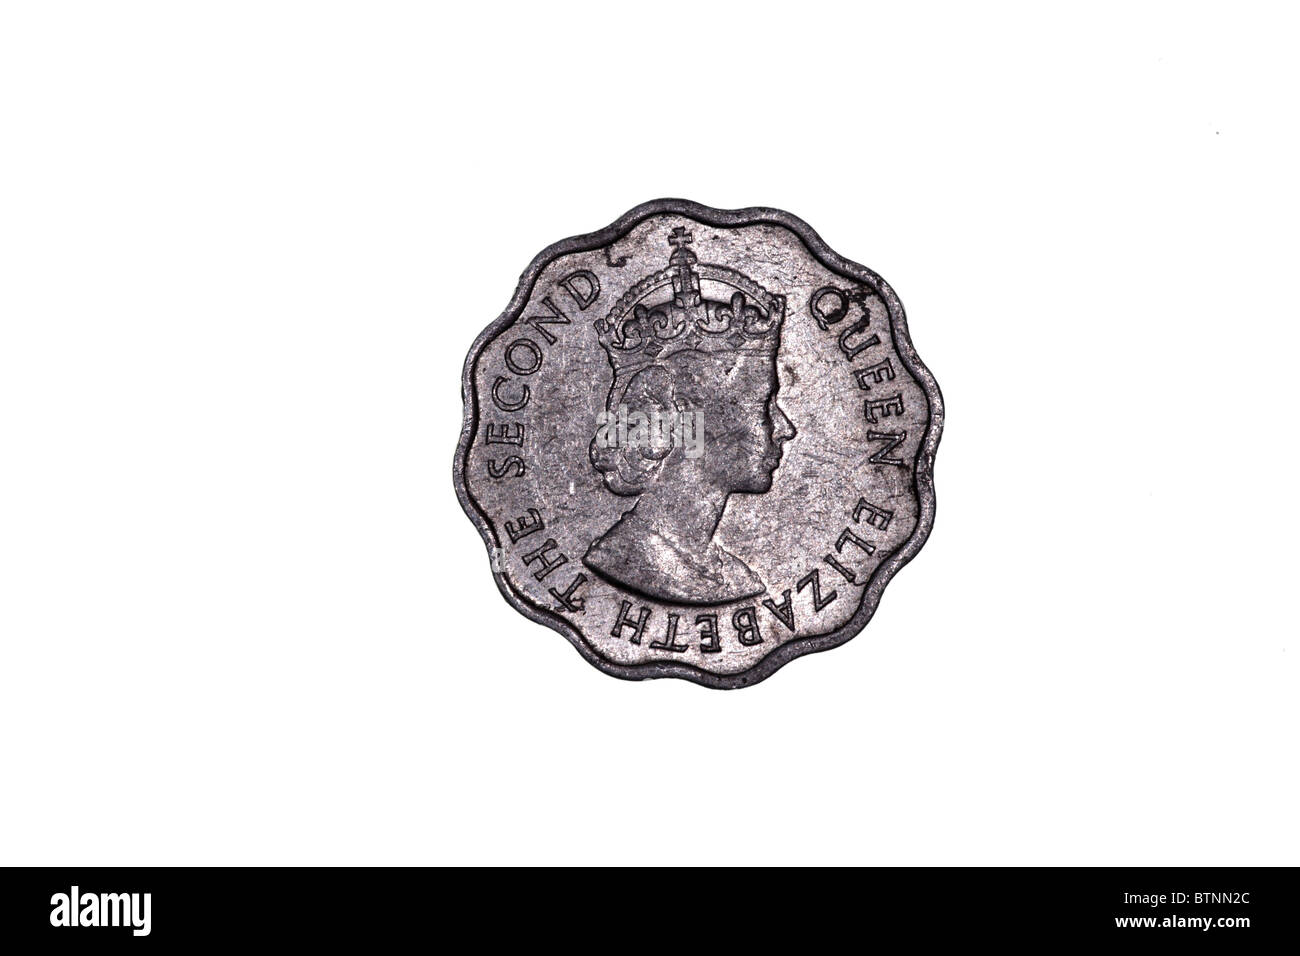 Belize Coin Stock Photo